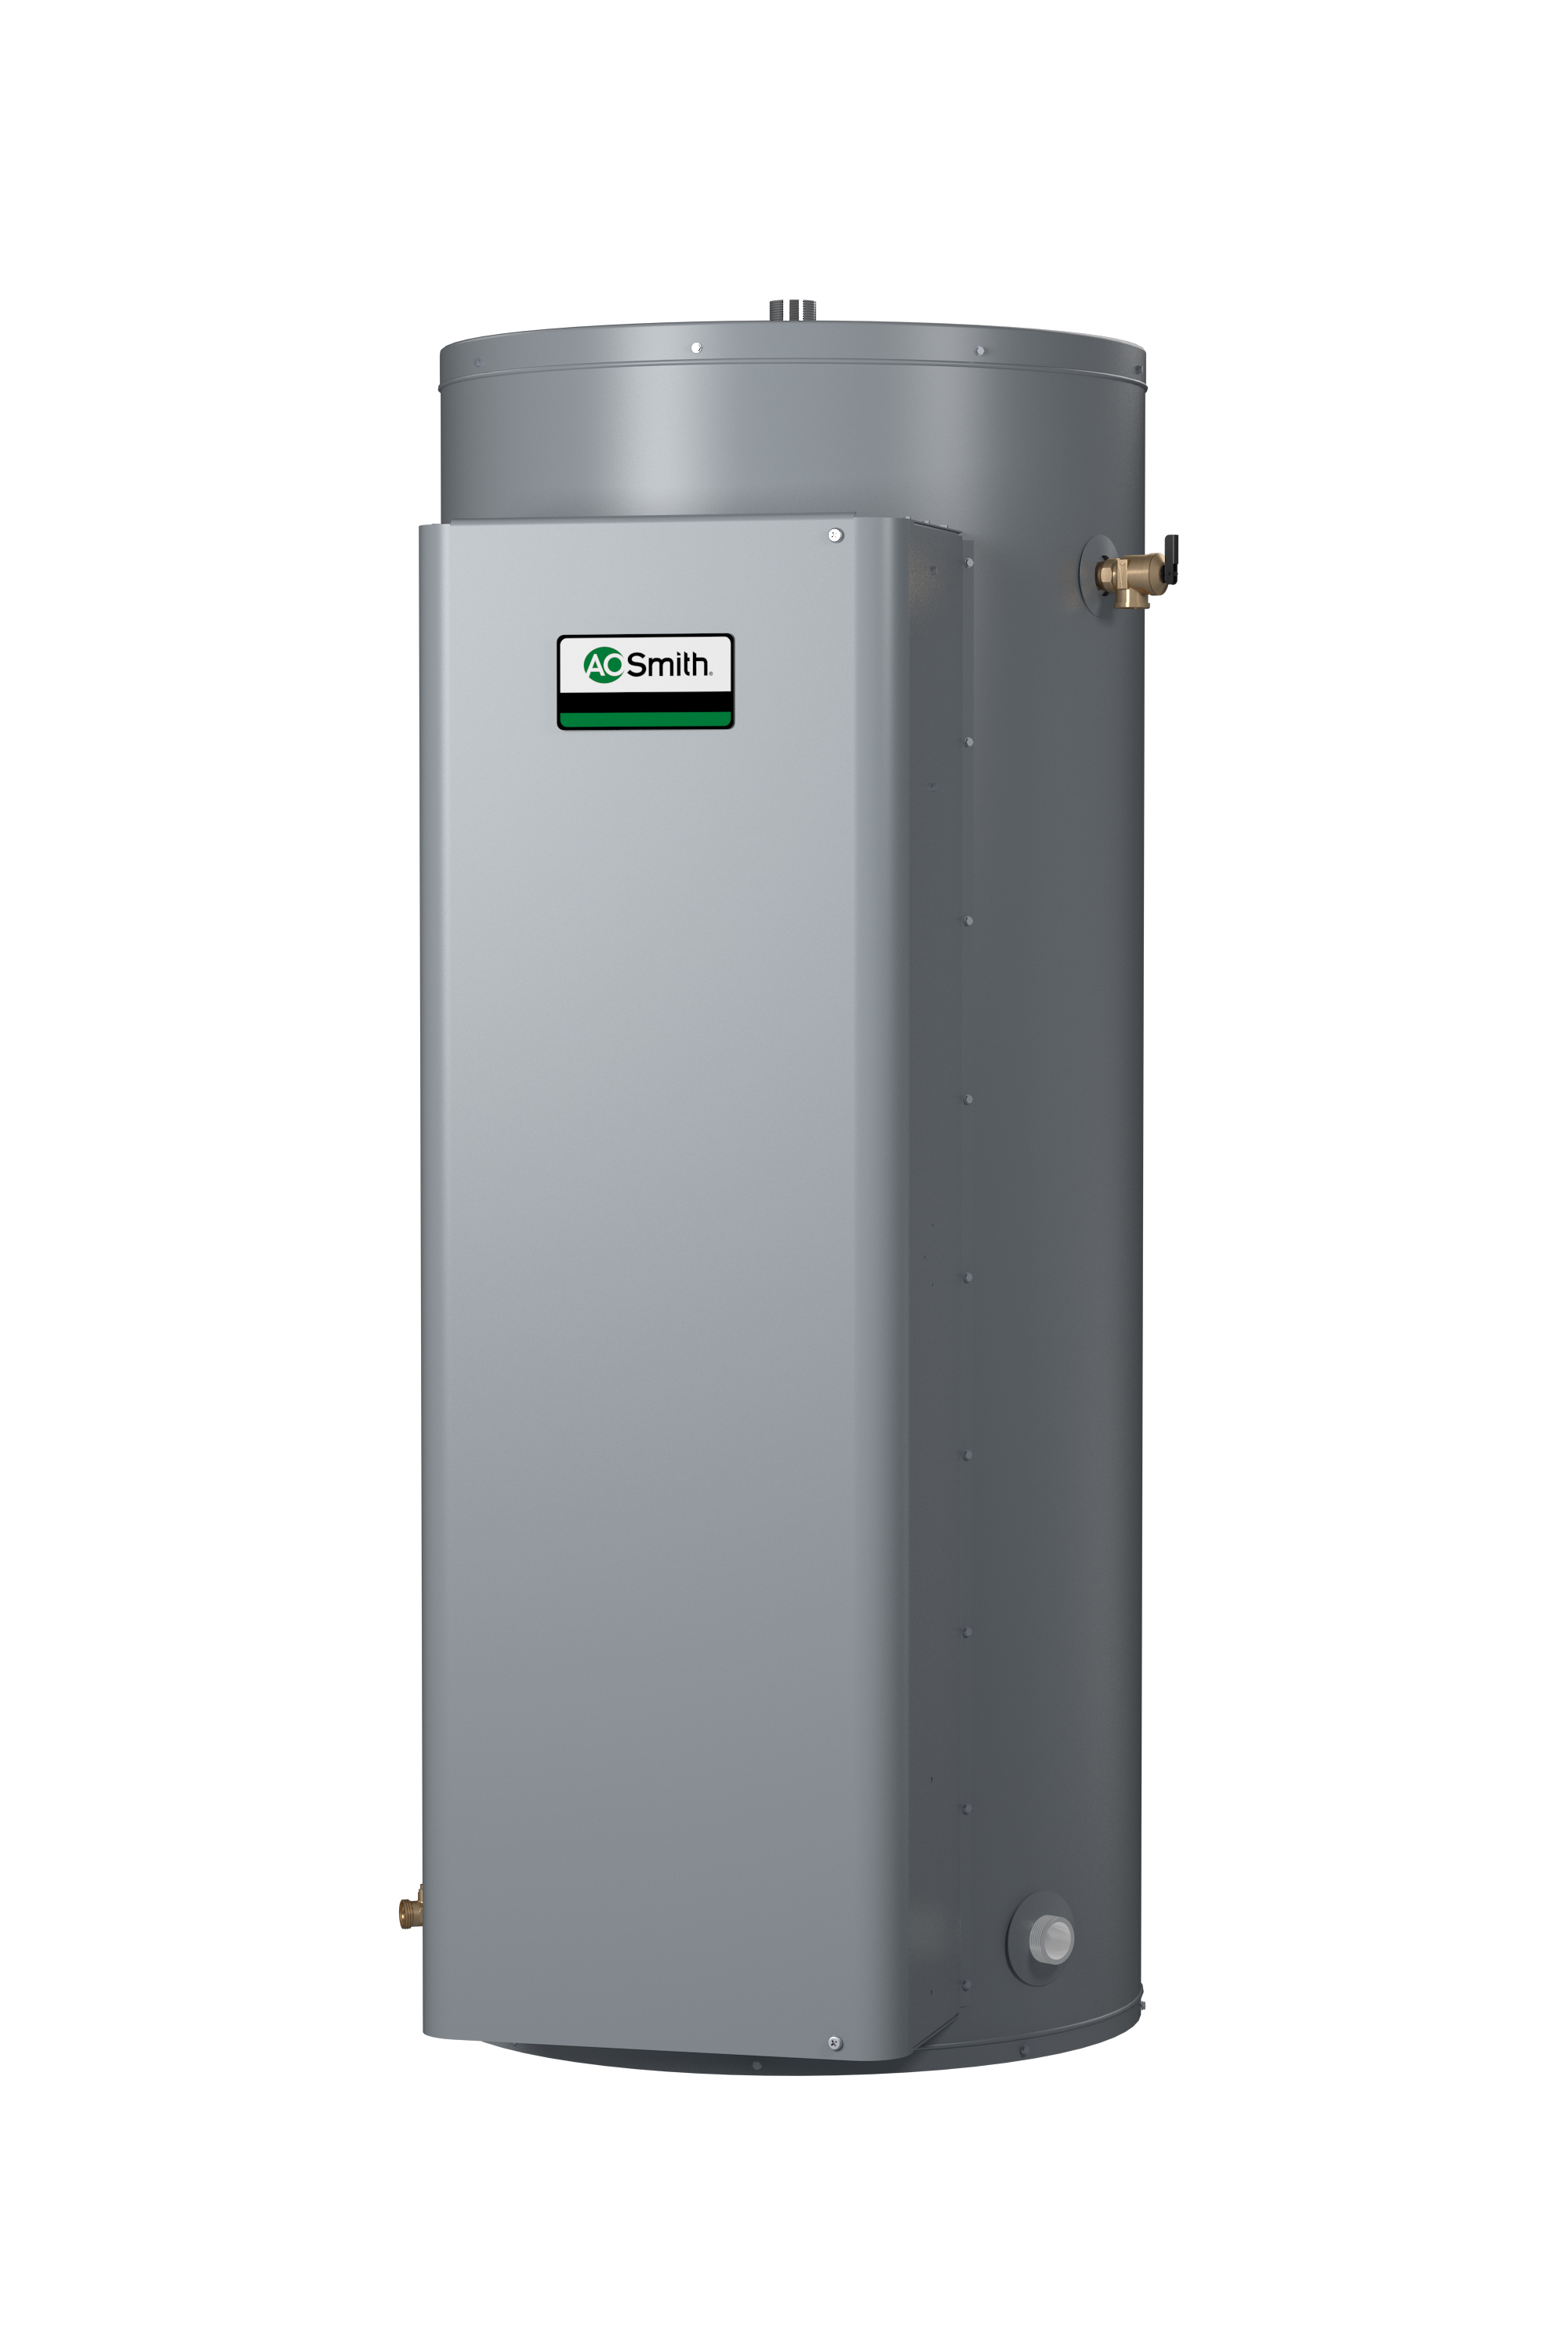 AO SMITH DVE-120-18, 119 GALLONS, 18.0KW, 277 VOLT, 65 AMPS, 1 PHASE, 3 ELEMENT, GOLD Xi SERIES HEAVY DUTY COMMERCIAL ELECTRIC WATER HEATER